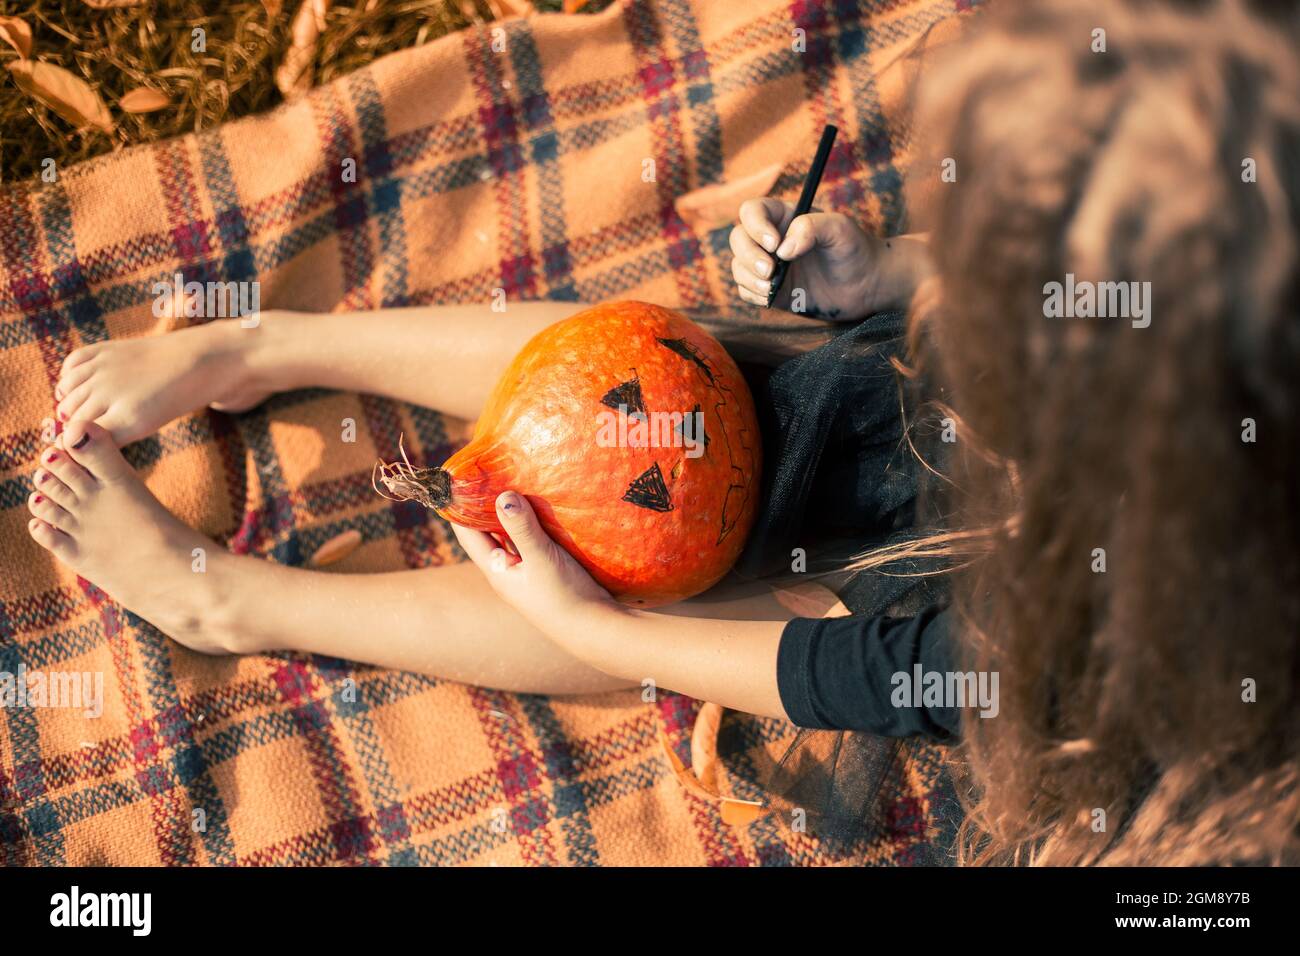 Halloween. Girl with long hair wearing black dress sits on an orange blanket in the park and draws a face on a pumpkin. Stock Photo